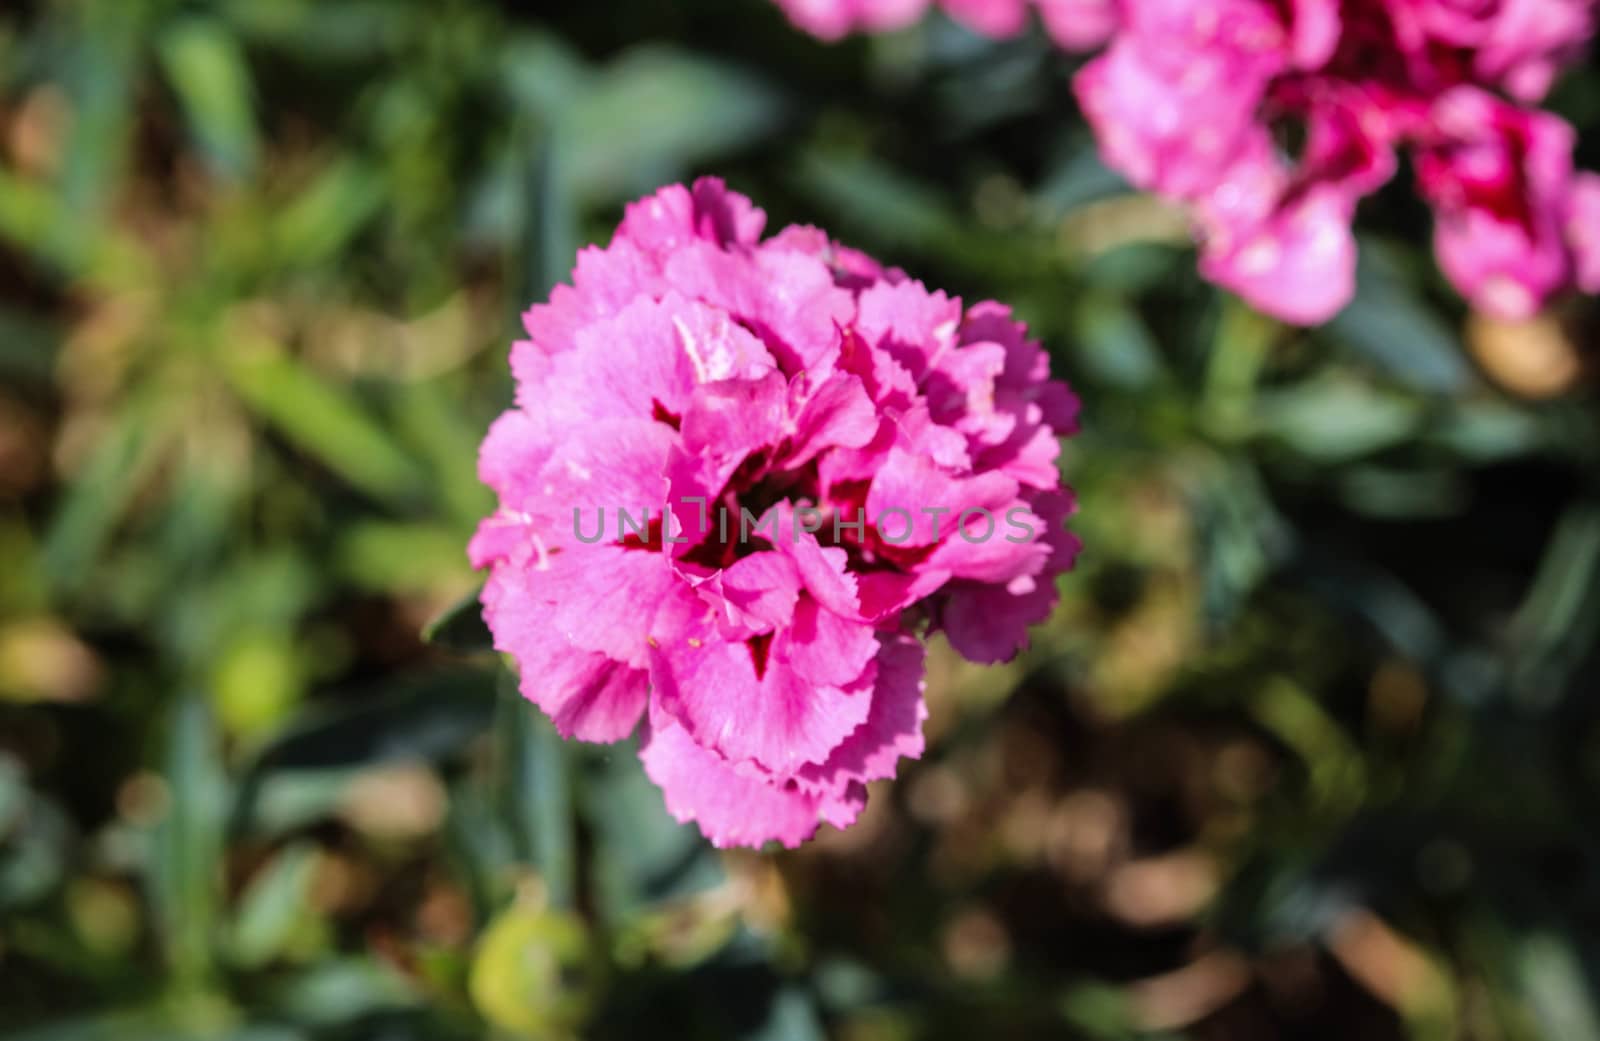 close up of Dianthus caryophyllus, commonly known as the carnation or clove pink, is a species of Dianthus. This flower is blooming in spring in a garden